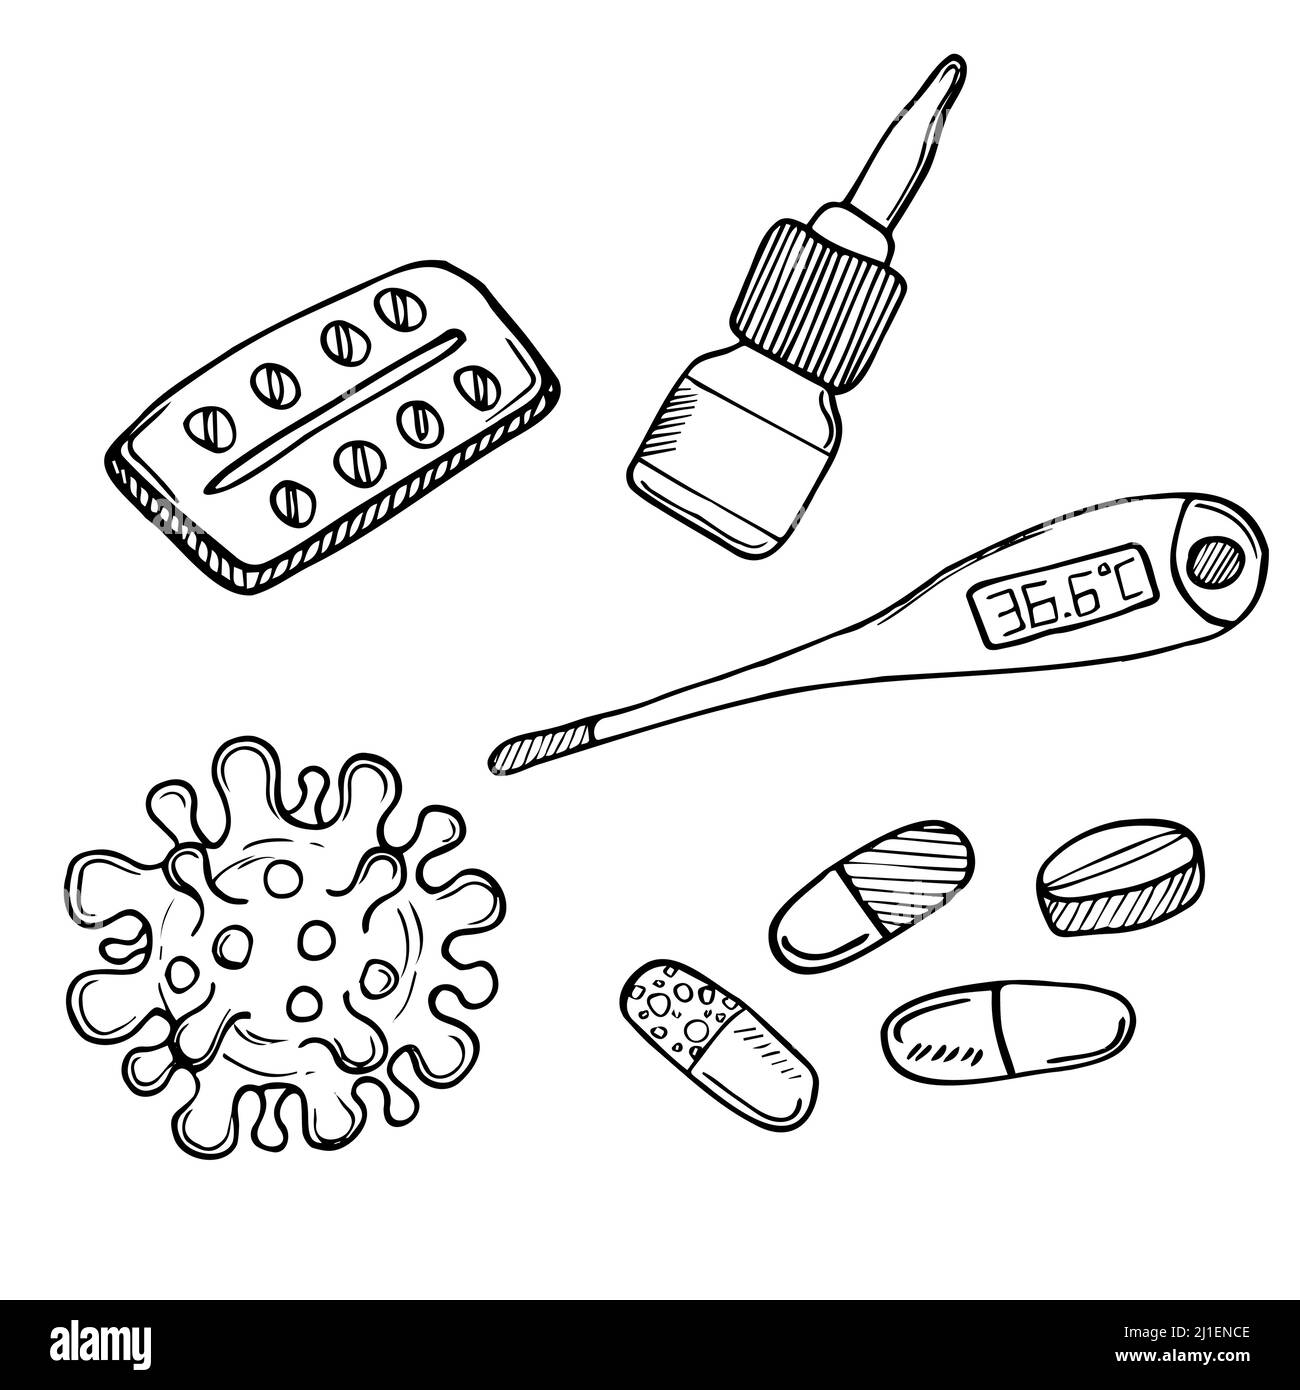 https://c8.alamy.com/comp/2J1ENCE/flu-doodle-drawing-collection-elements-such-as-medicine-thermometer-viruses-etc-are-included-hand-drawn-vector-doodle-illustrations-2J1ENCE.jpg